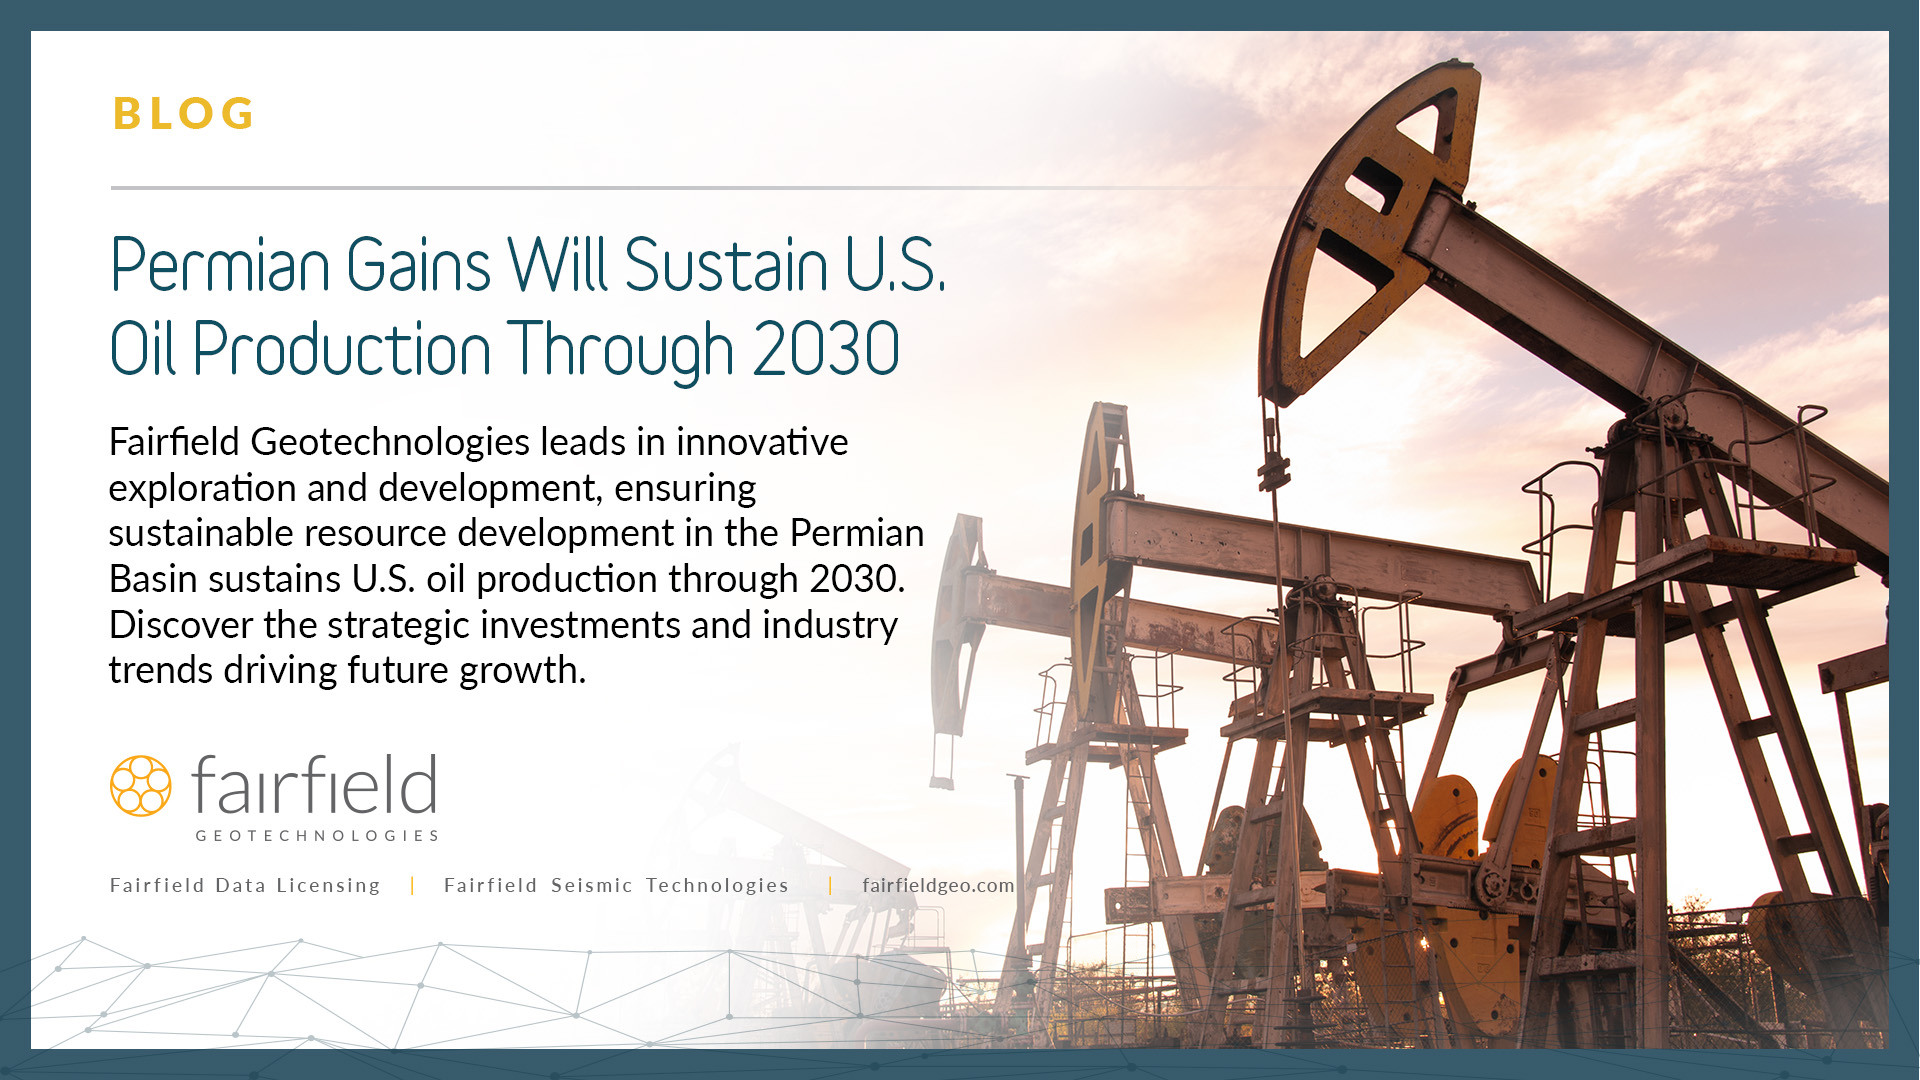 Permian Gains Will Sustain U.S. Oil Production Through 2030